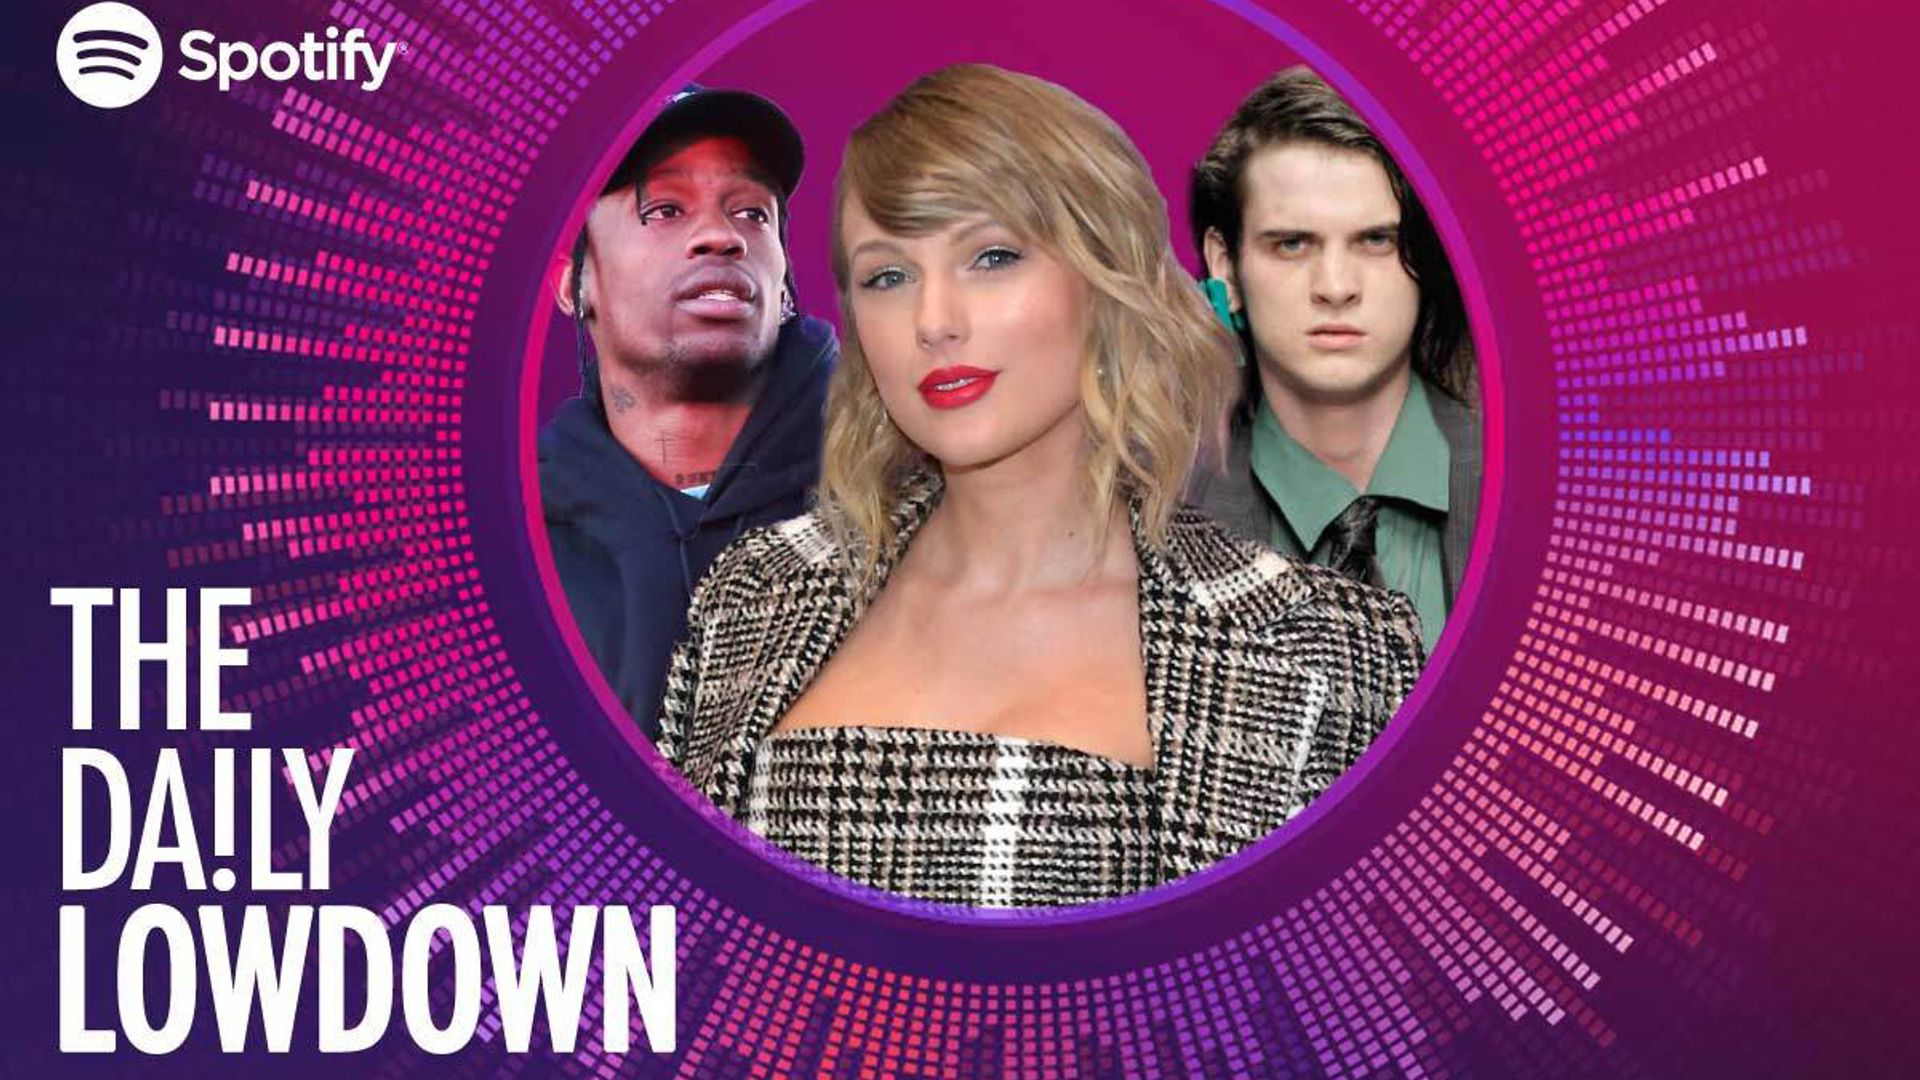 The Daily Lowdown: Joe Alwyn talks songwriting with girlfriend Taylor Swift for the first time